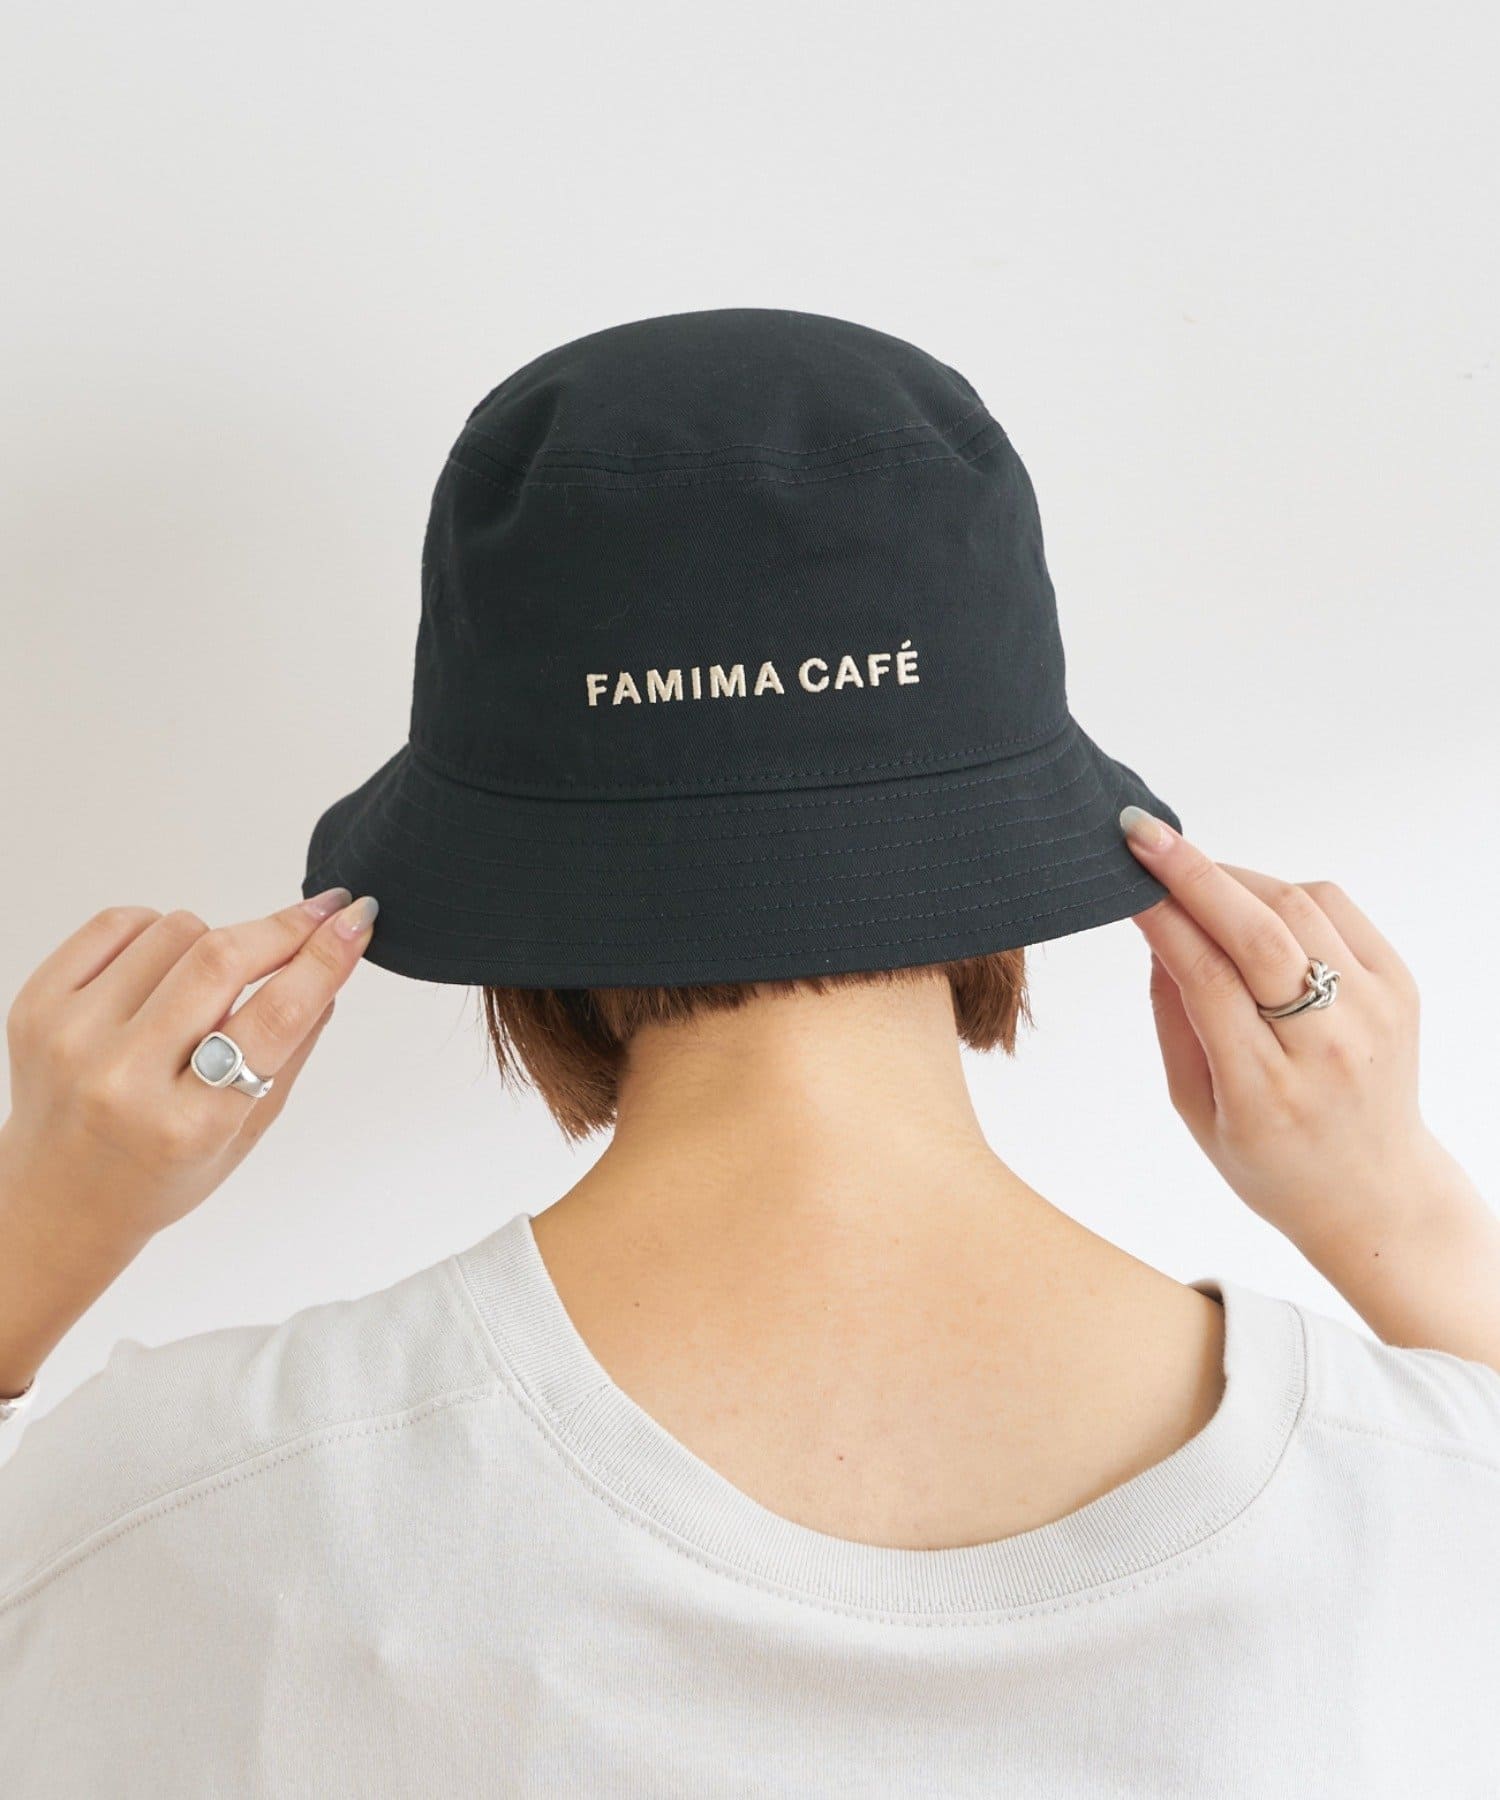 OUTLET(アウトレット) 【CIAOPANIC TYPY】【FAMIMA CAFE】ロゴ刺繍ハット